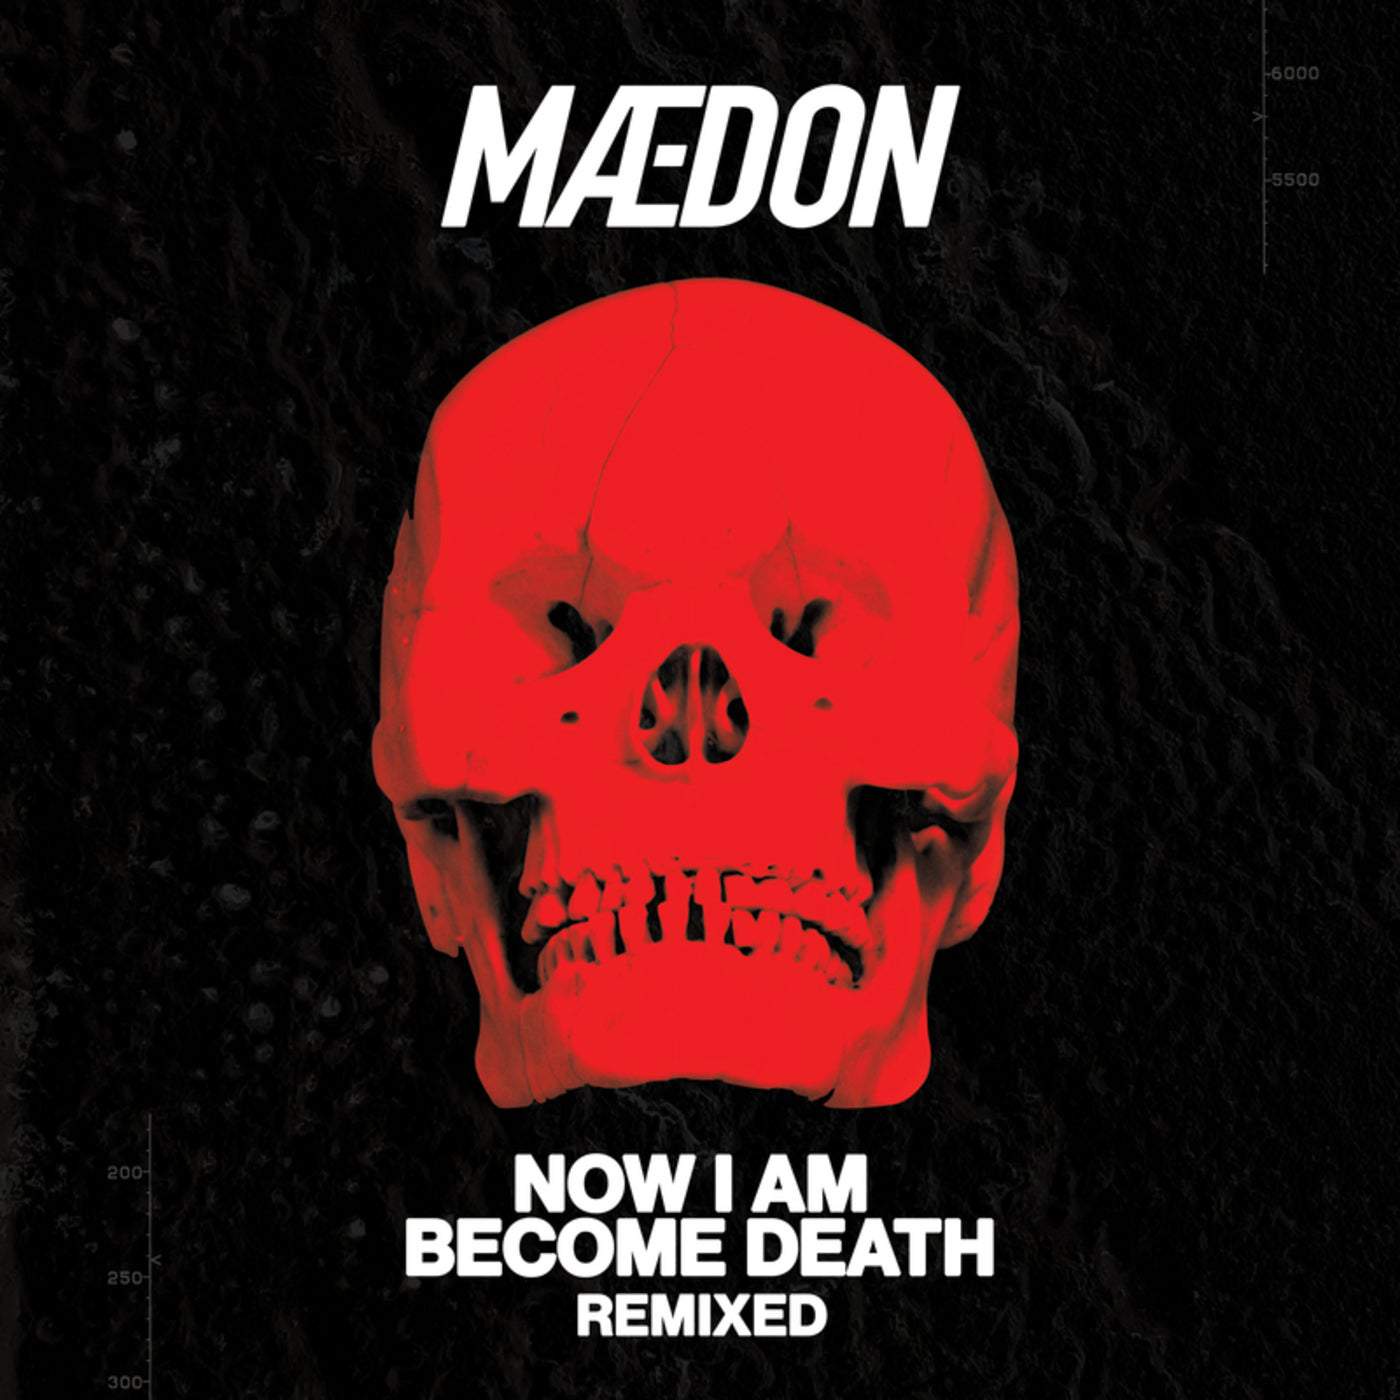 image cover: Maedon - Now I Am Become Death Remixed / SGLP11RX